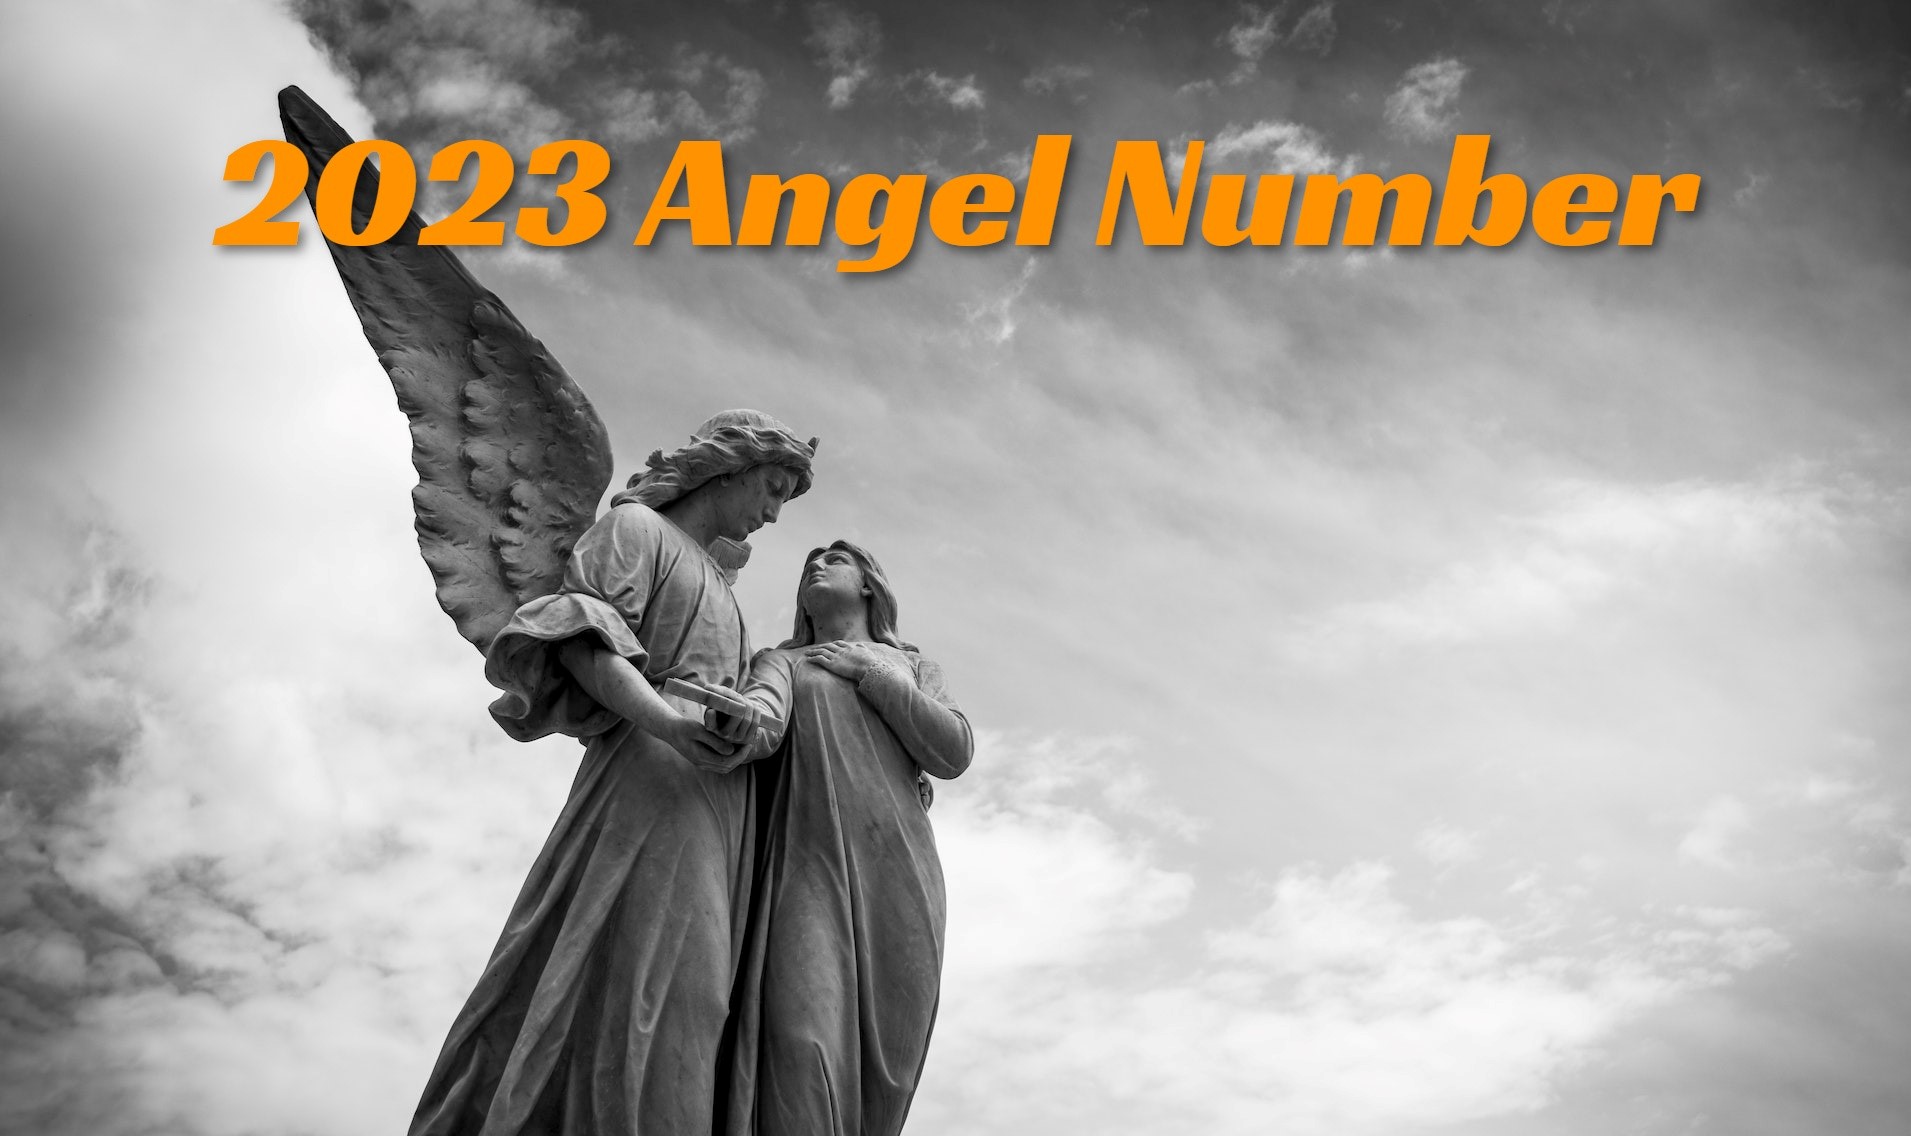 2023 Angel Number - A Message Of Hope And Positivity